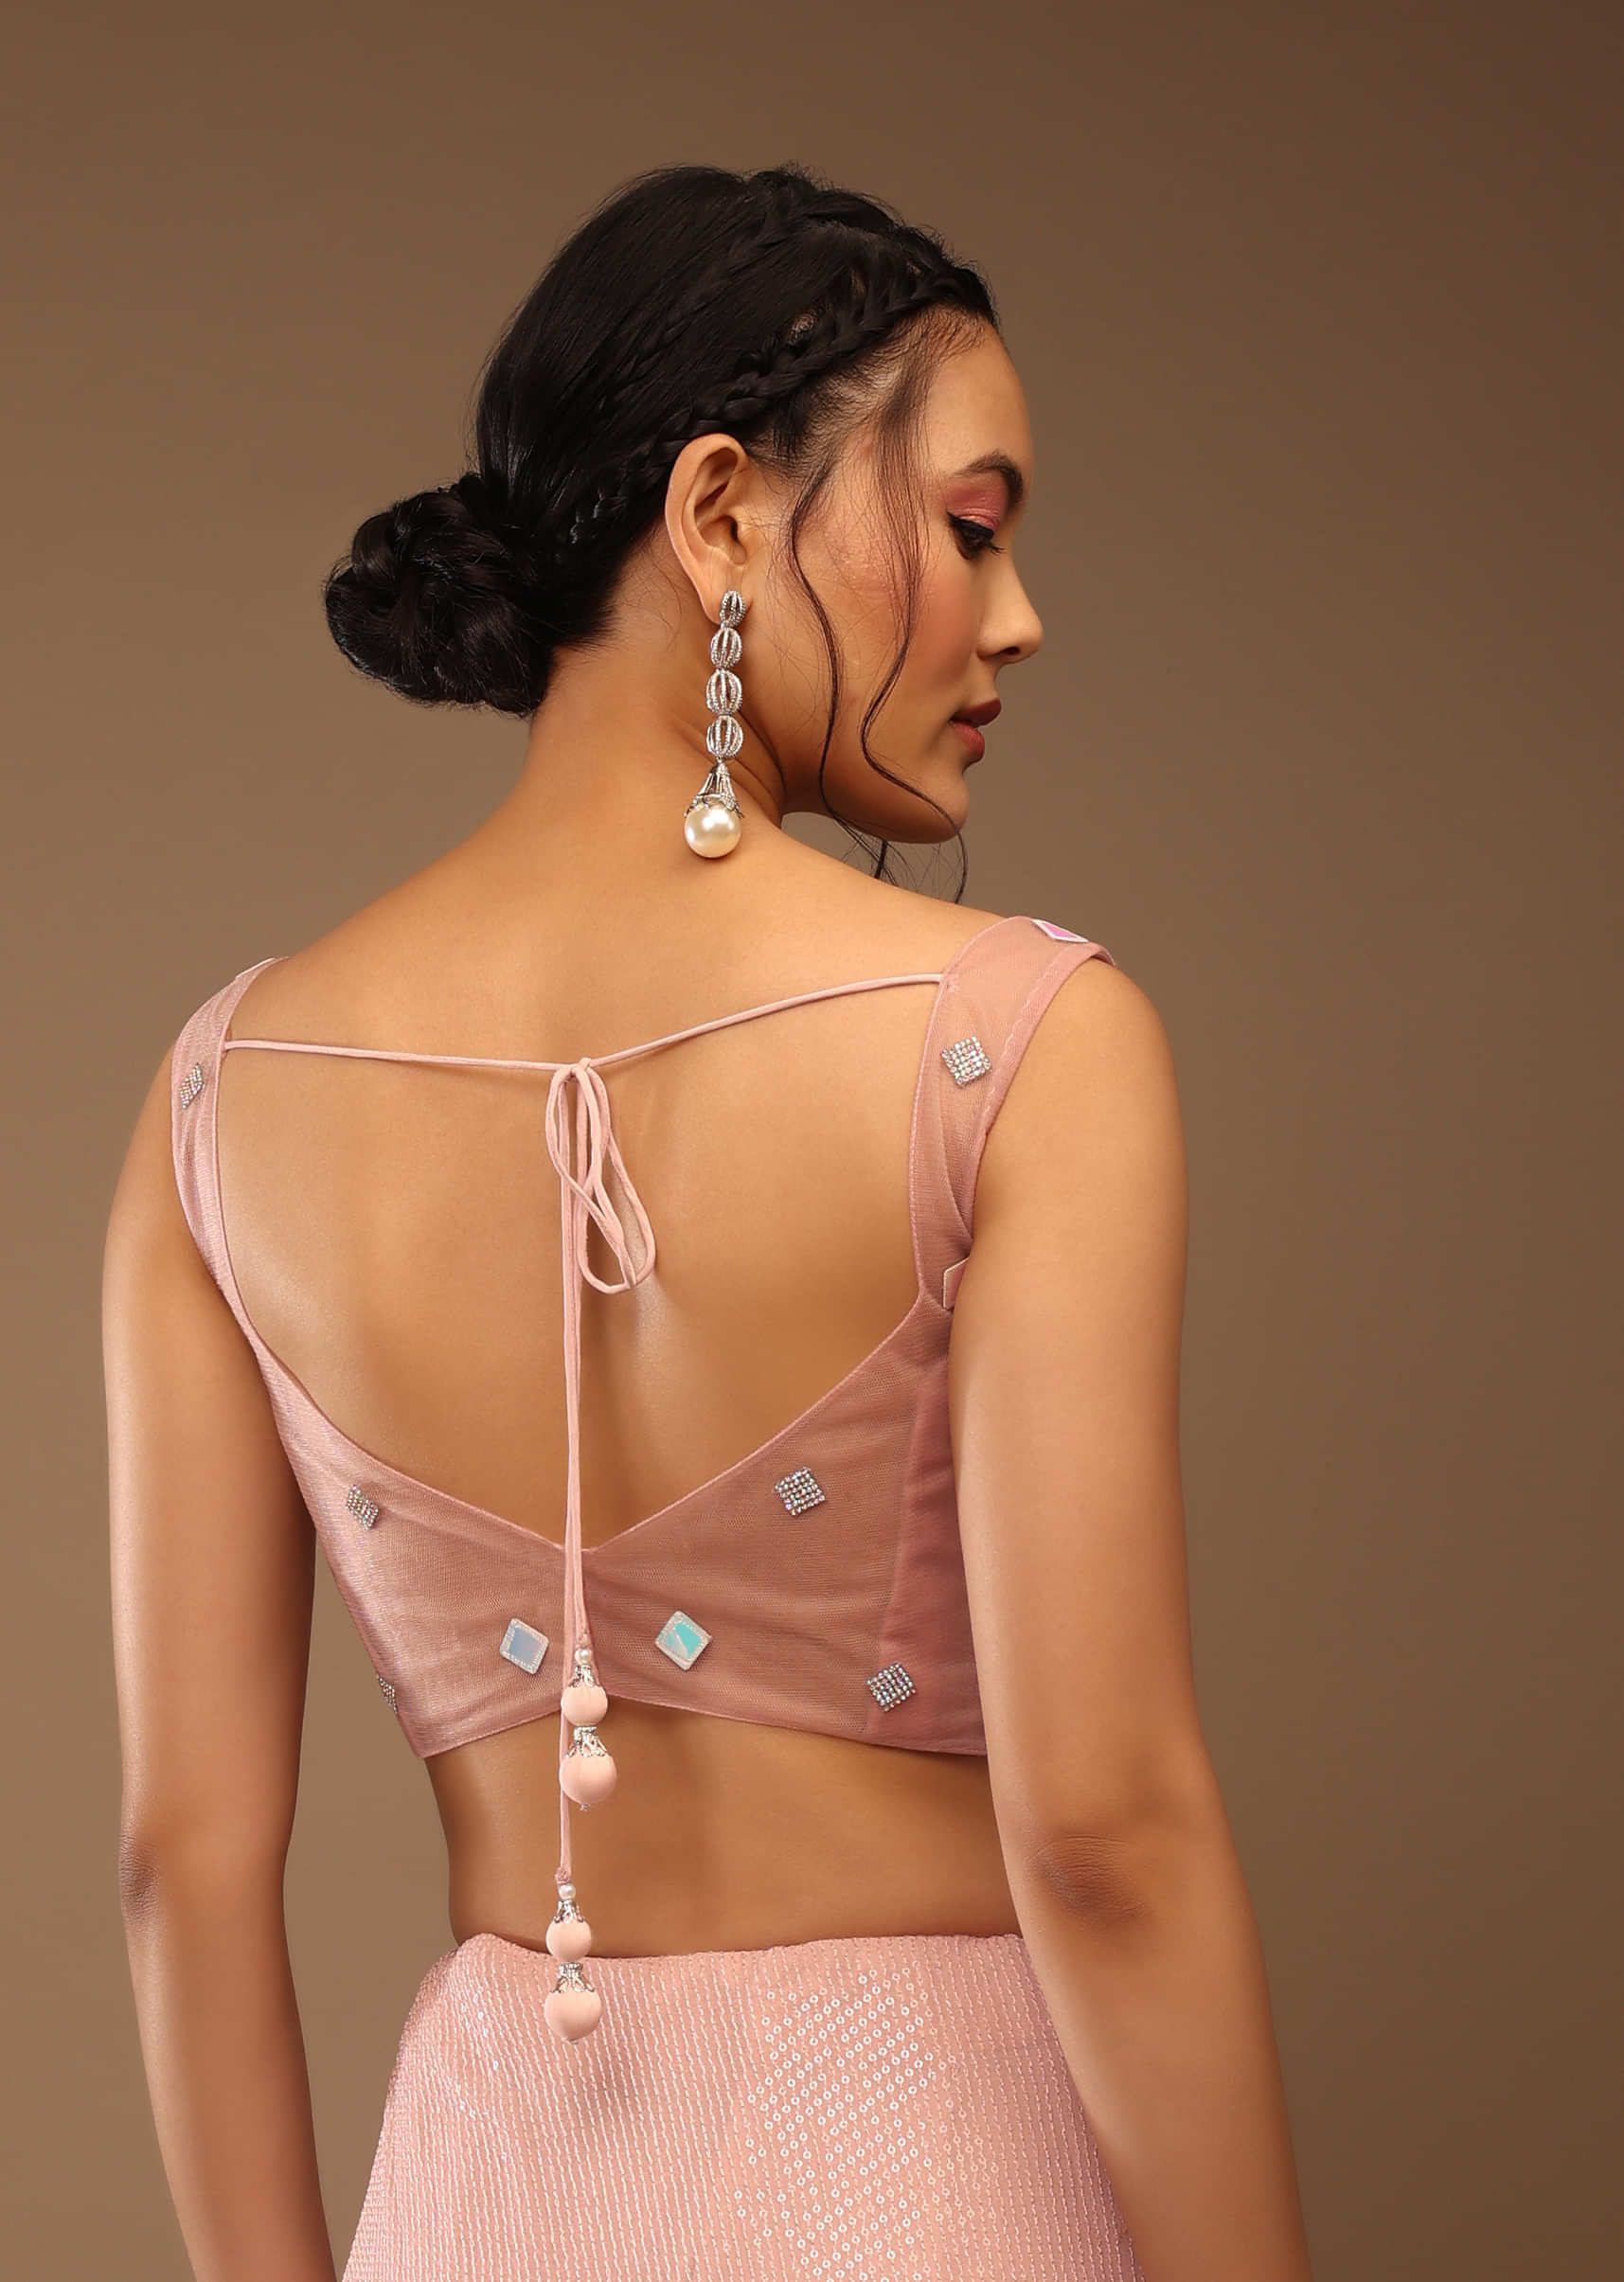 Peach Skin Saree With A Crop Top In Iridescent Foil Embellishment